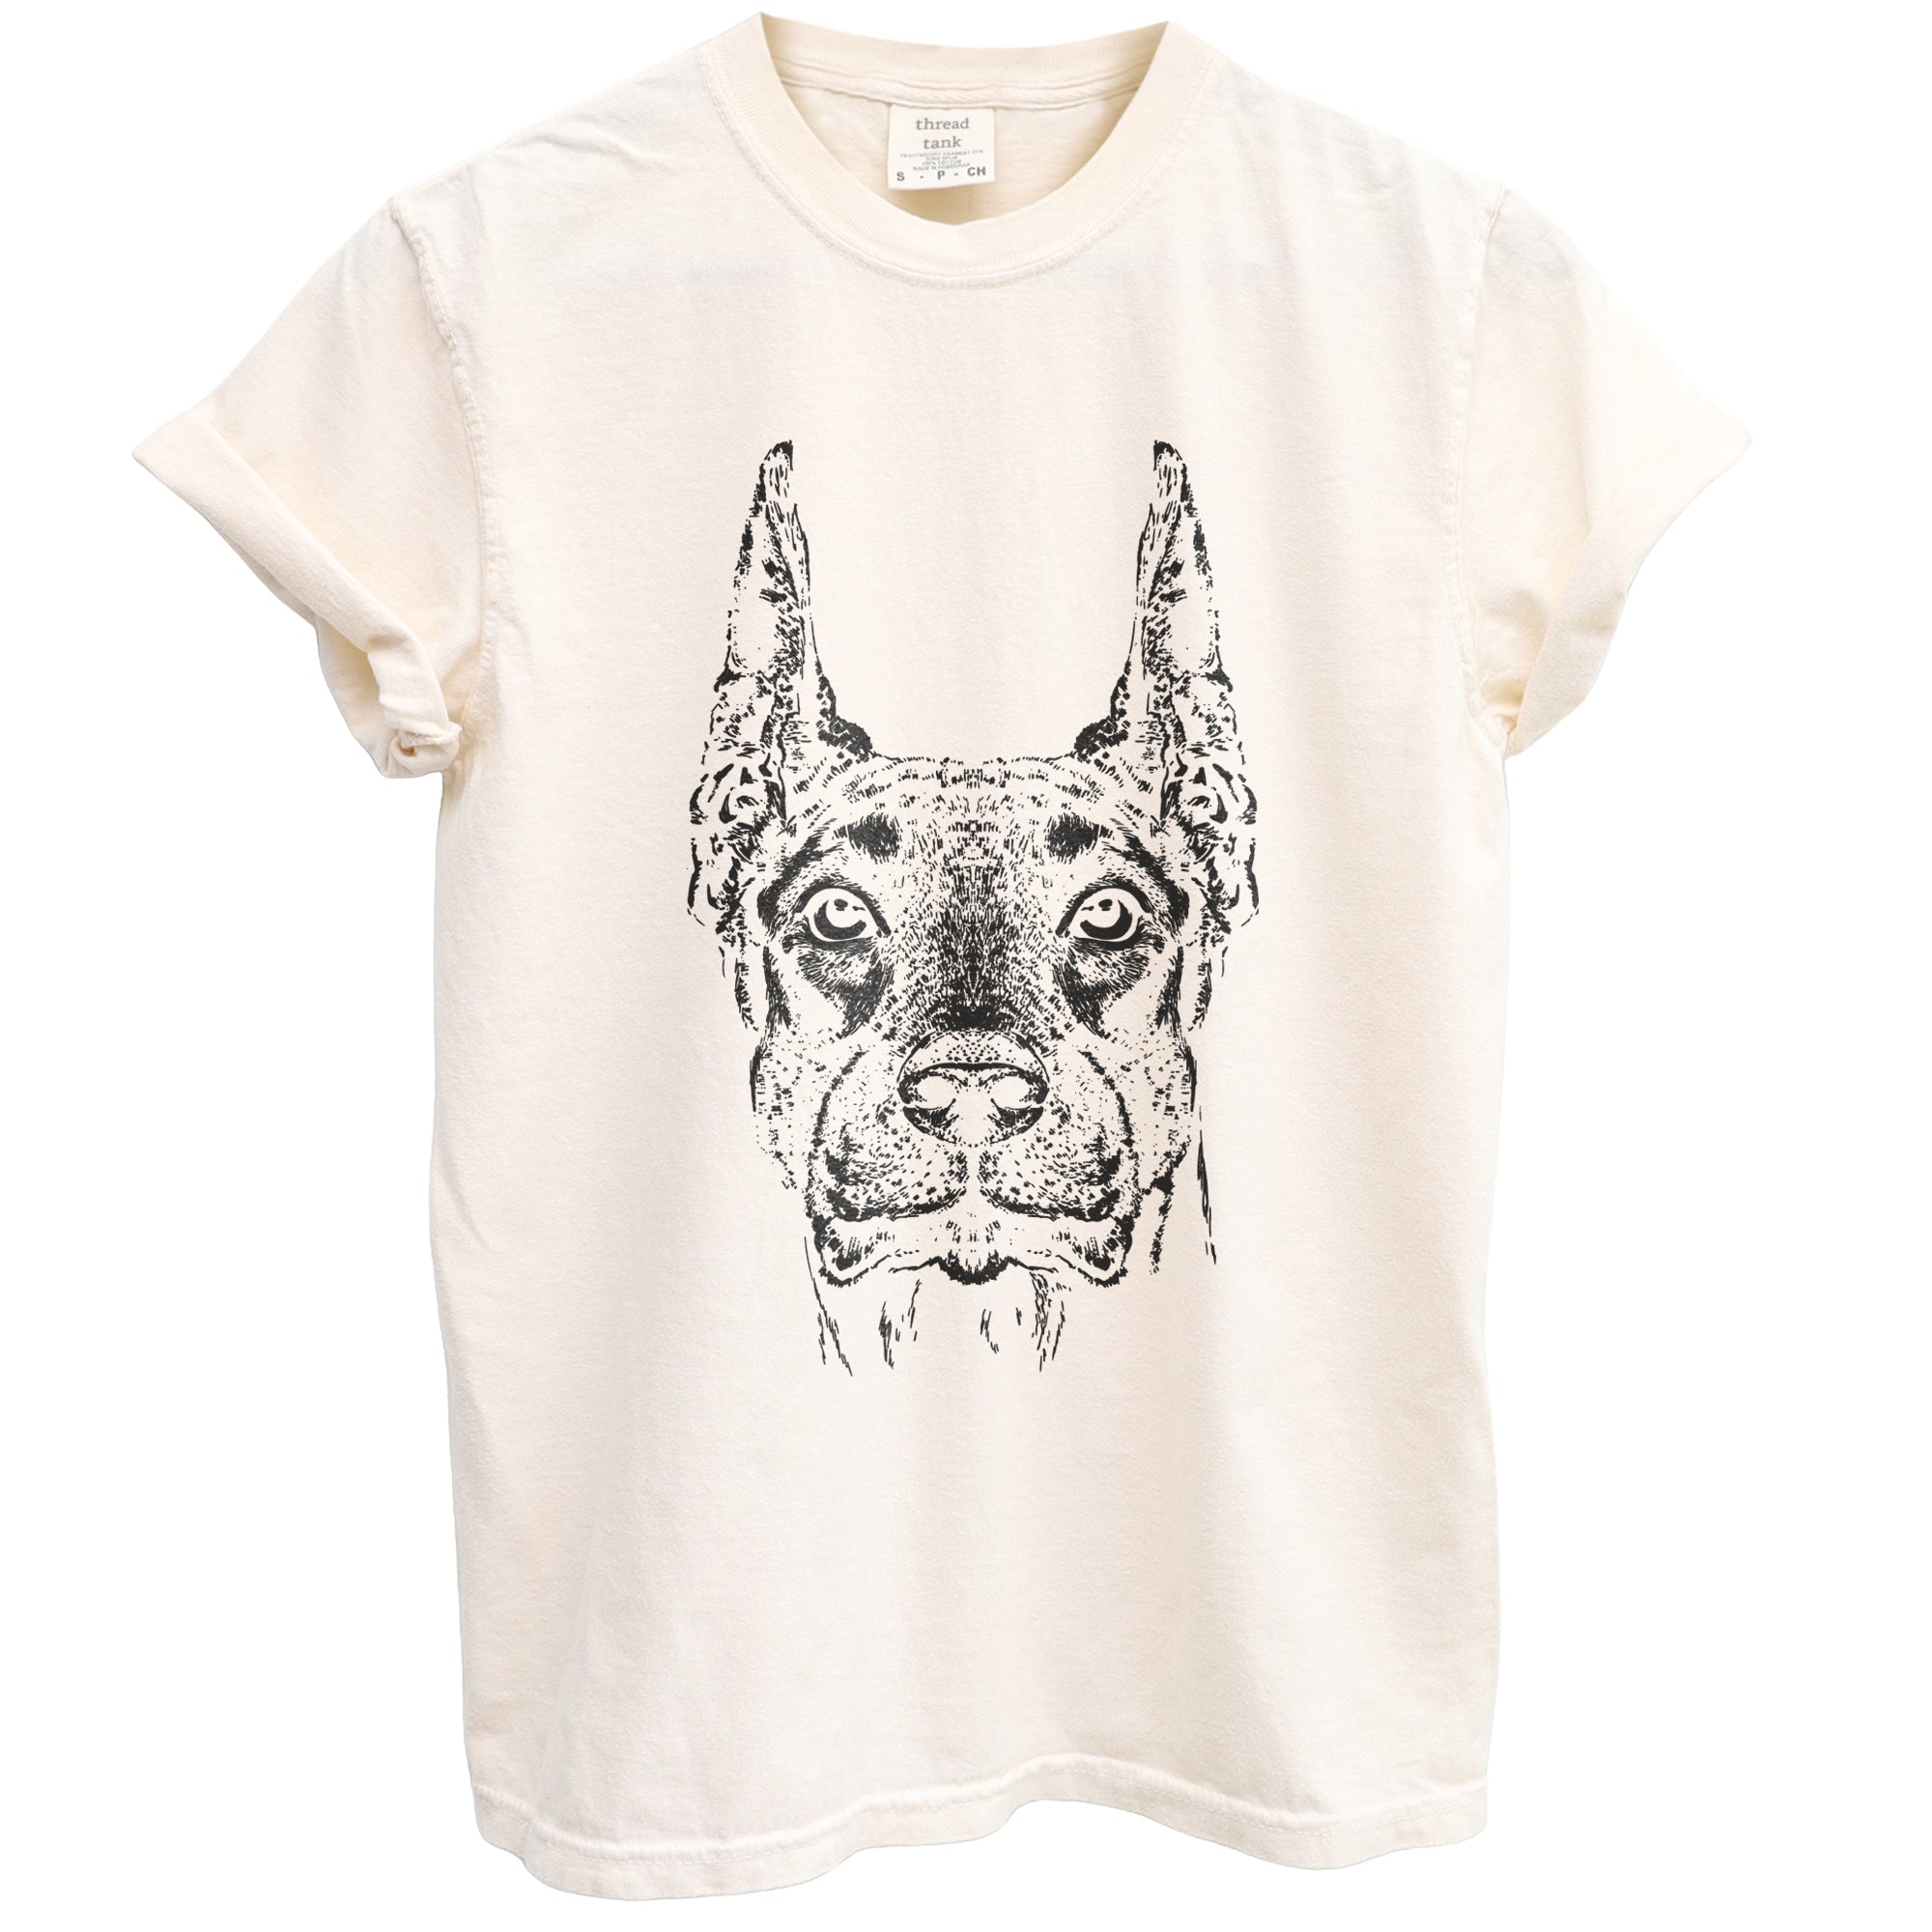 Doberman Dog Sketch Garment-Dyed Tee - Stories You Can Wear